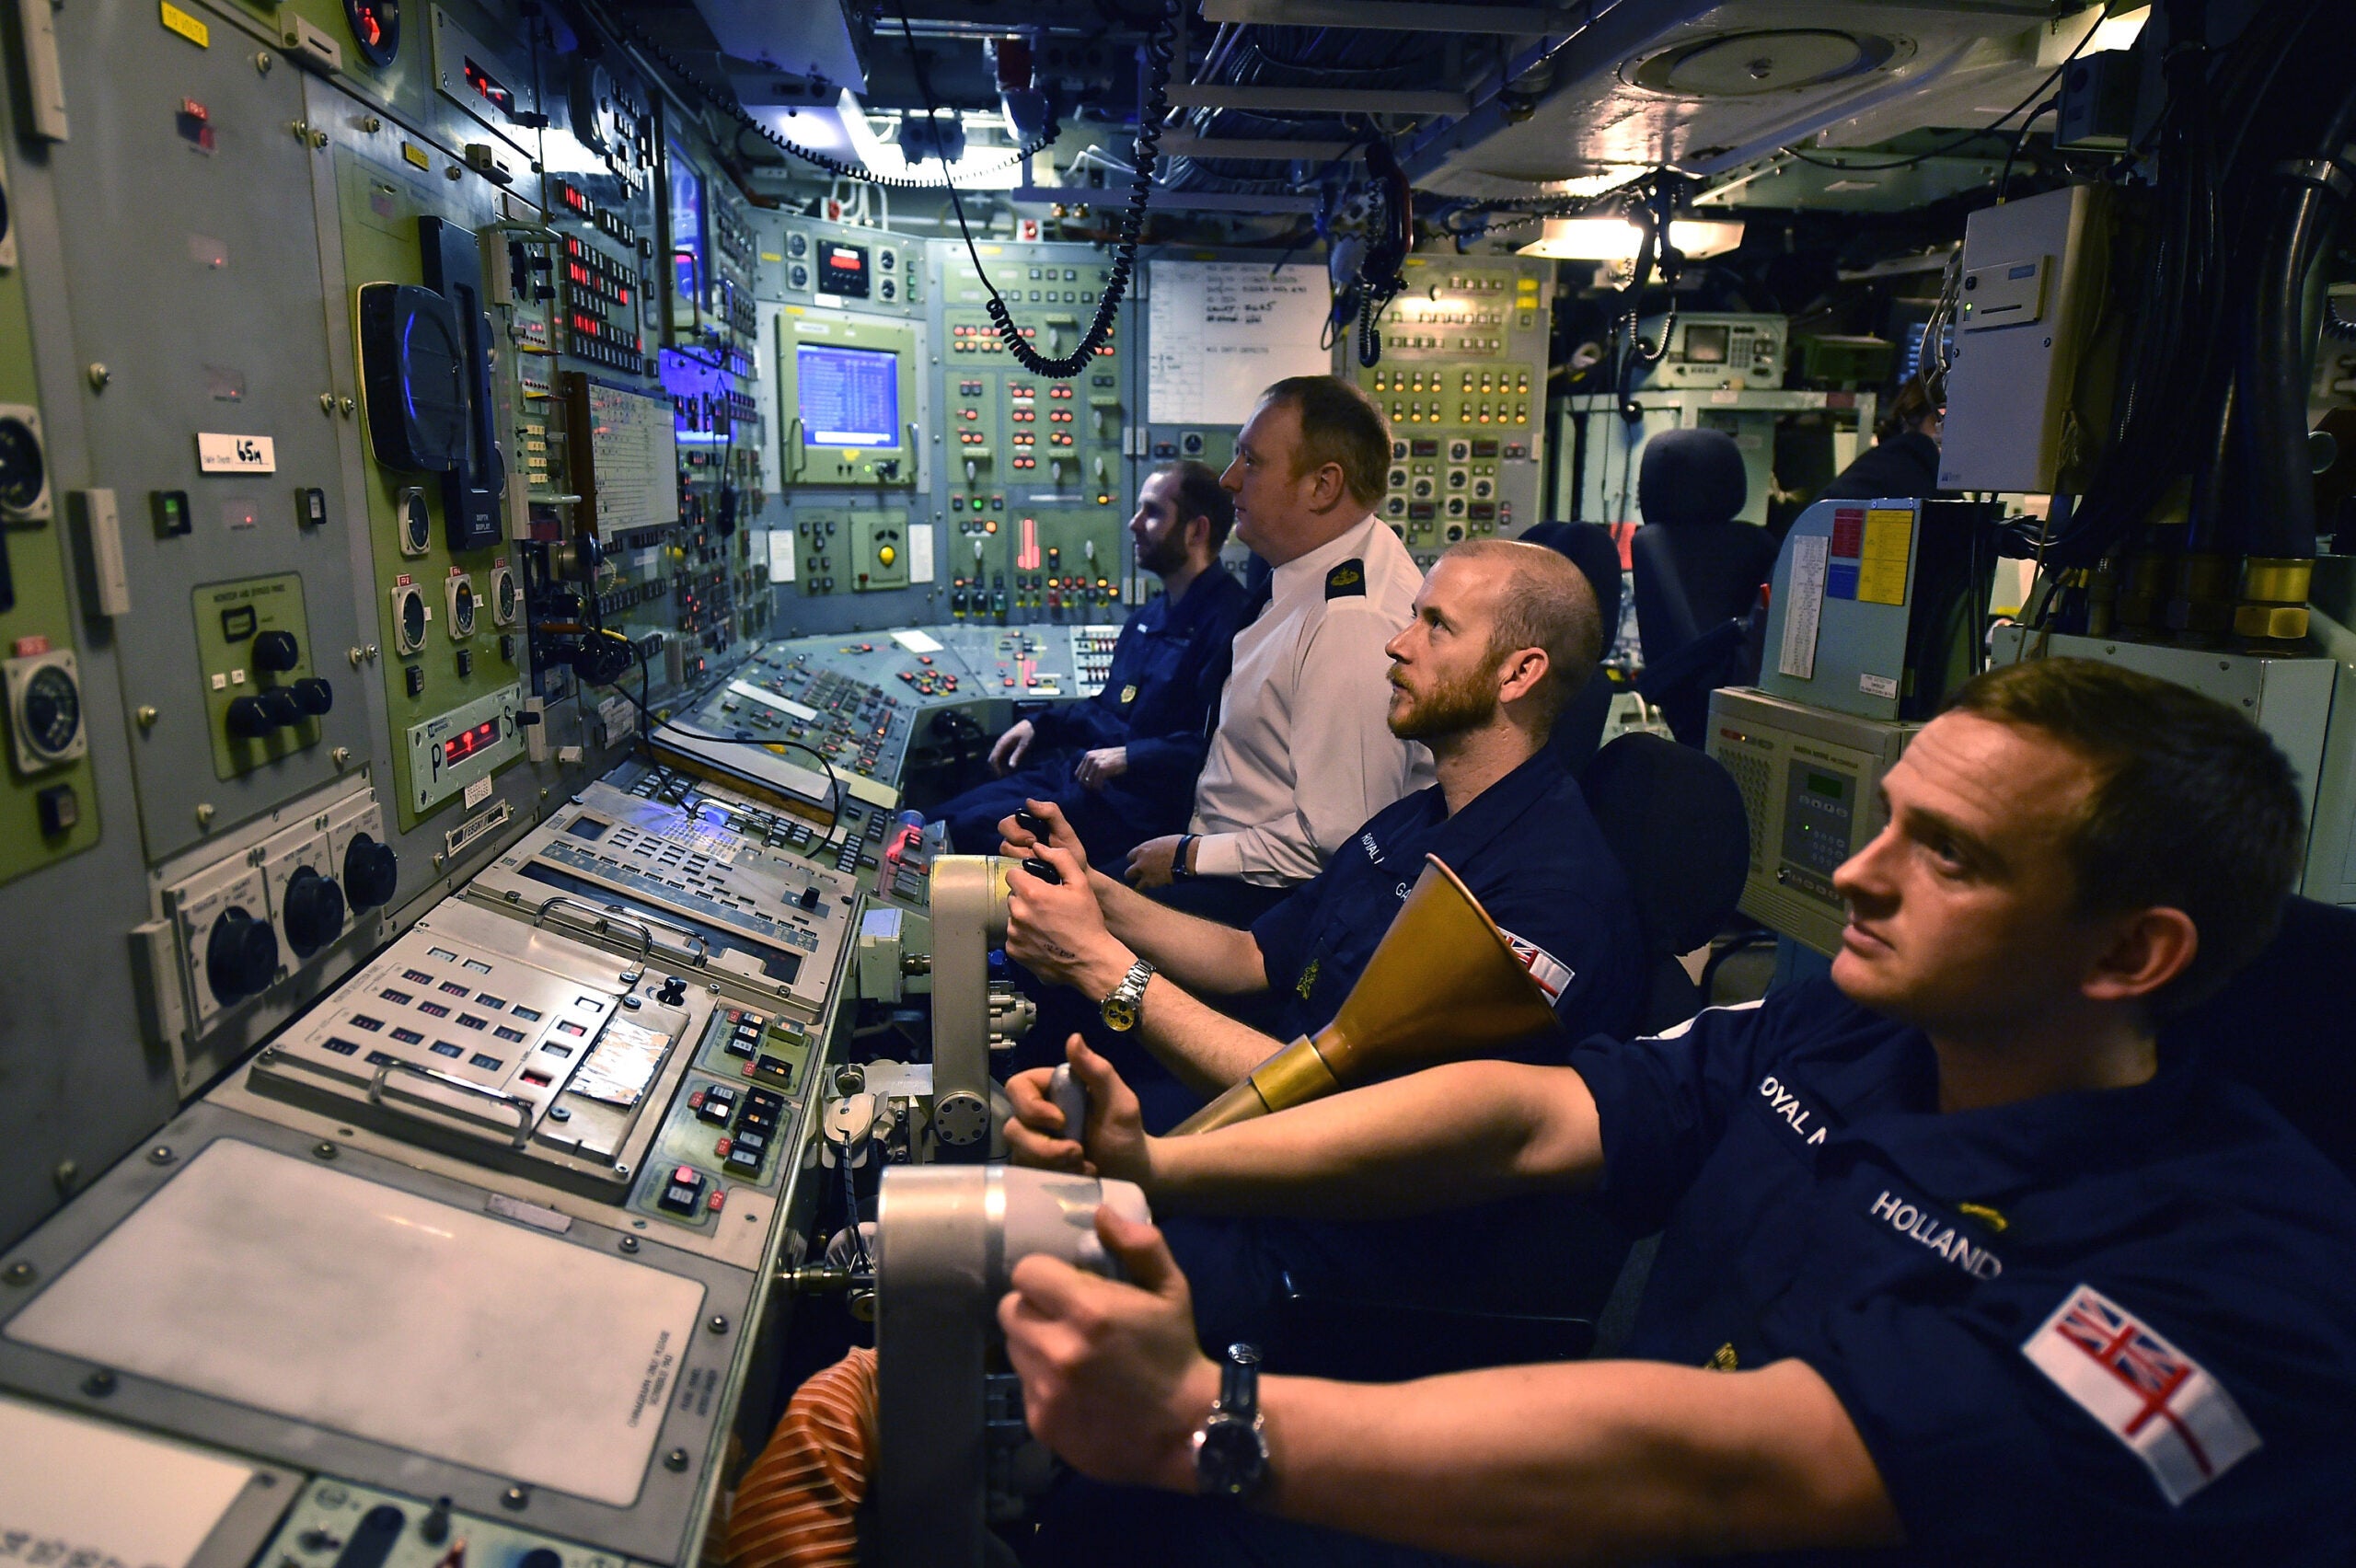 RHU, SCOTLAND - JANUARY 20:  Royal Navy personnel in the control room on HMS Vigilant, submarine on January 20, 2016 in Rhu, Scotland. HMS Vigilant is one of the UK's fleet of four Vanguard class nuclear-powered ballistic missile submarines carrying the Trident nuclear missile system. A decision on when to hold a key Westminster vote on renewing Trident submarine class is yet to be decided senior Whitehall sources have admitted.  (Photo by Jeff J Mitchell/Getty Images)